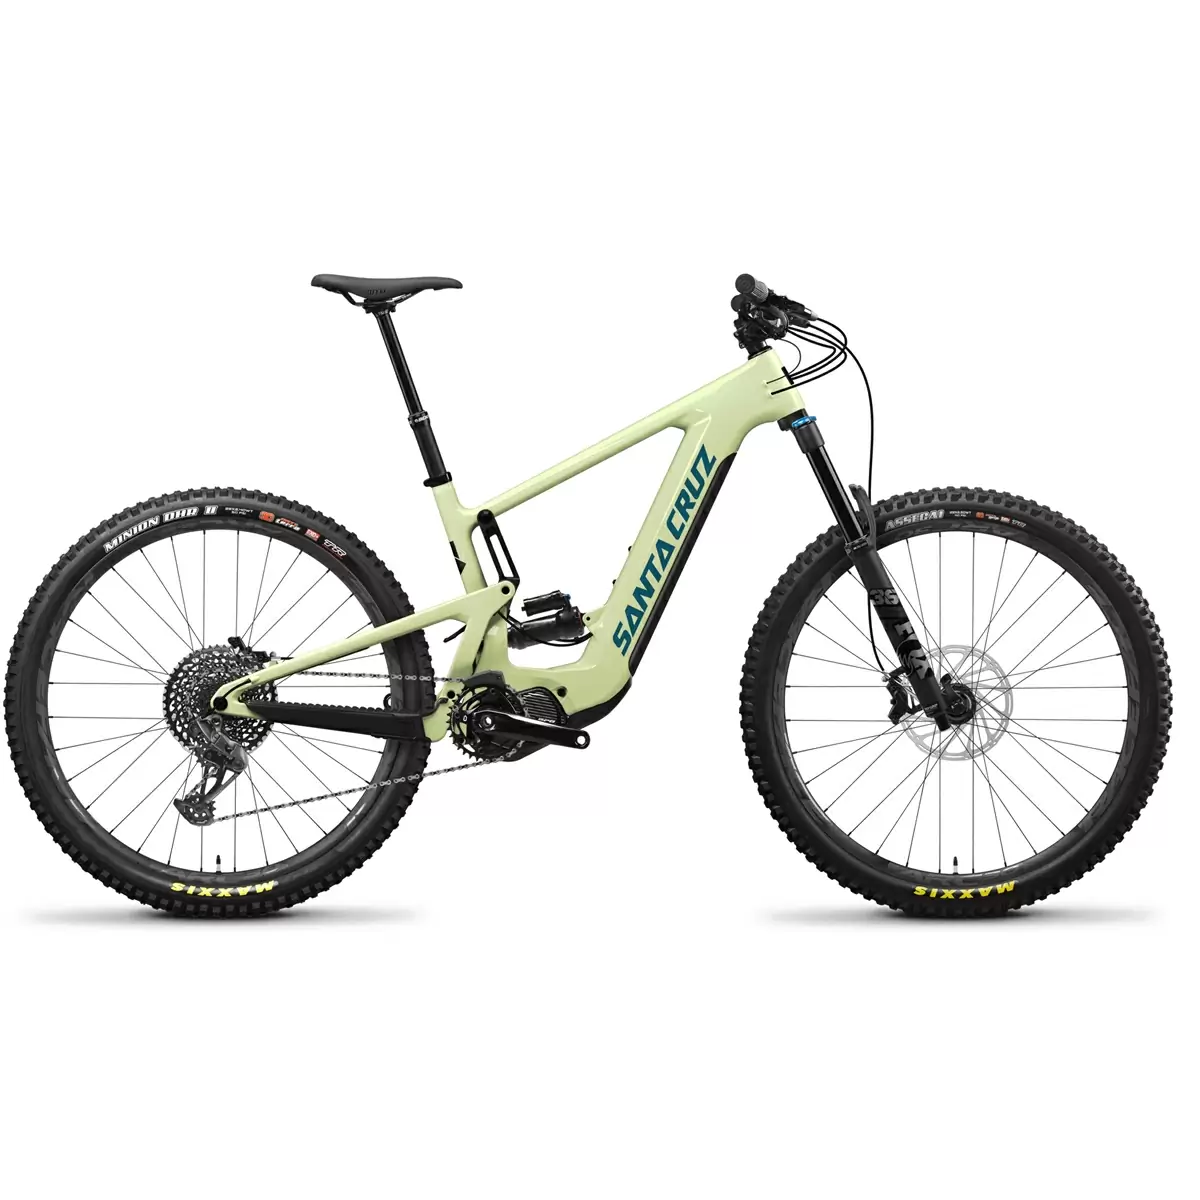 Heckler 9 CS 29'' 160mm 12s 720Wh Shimano EP8 Verde Aguacate 2023 Talla M - image